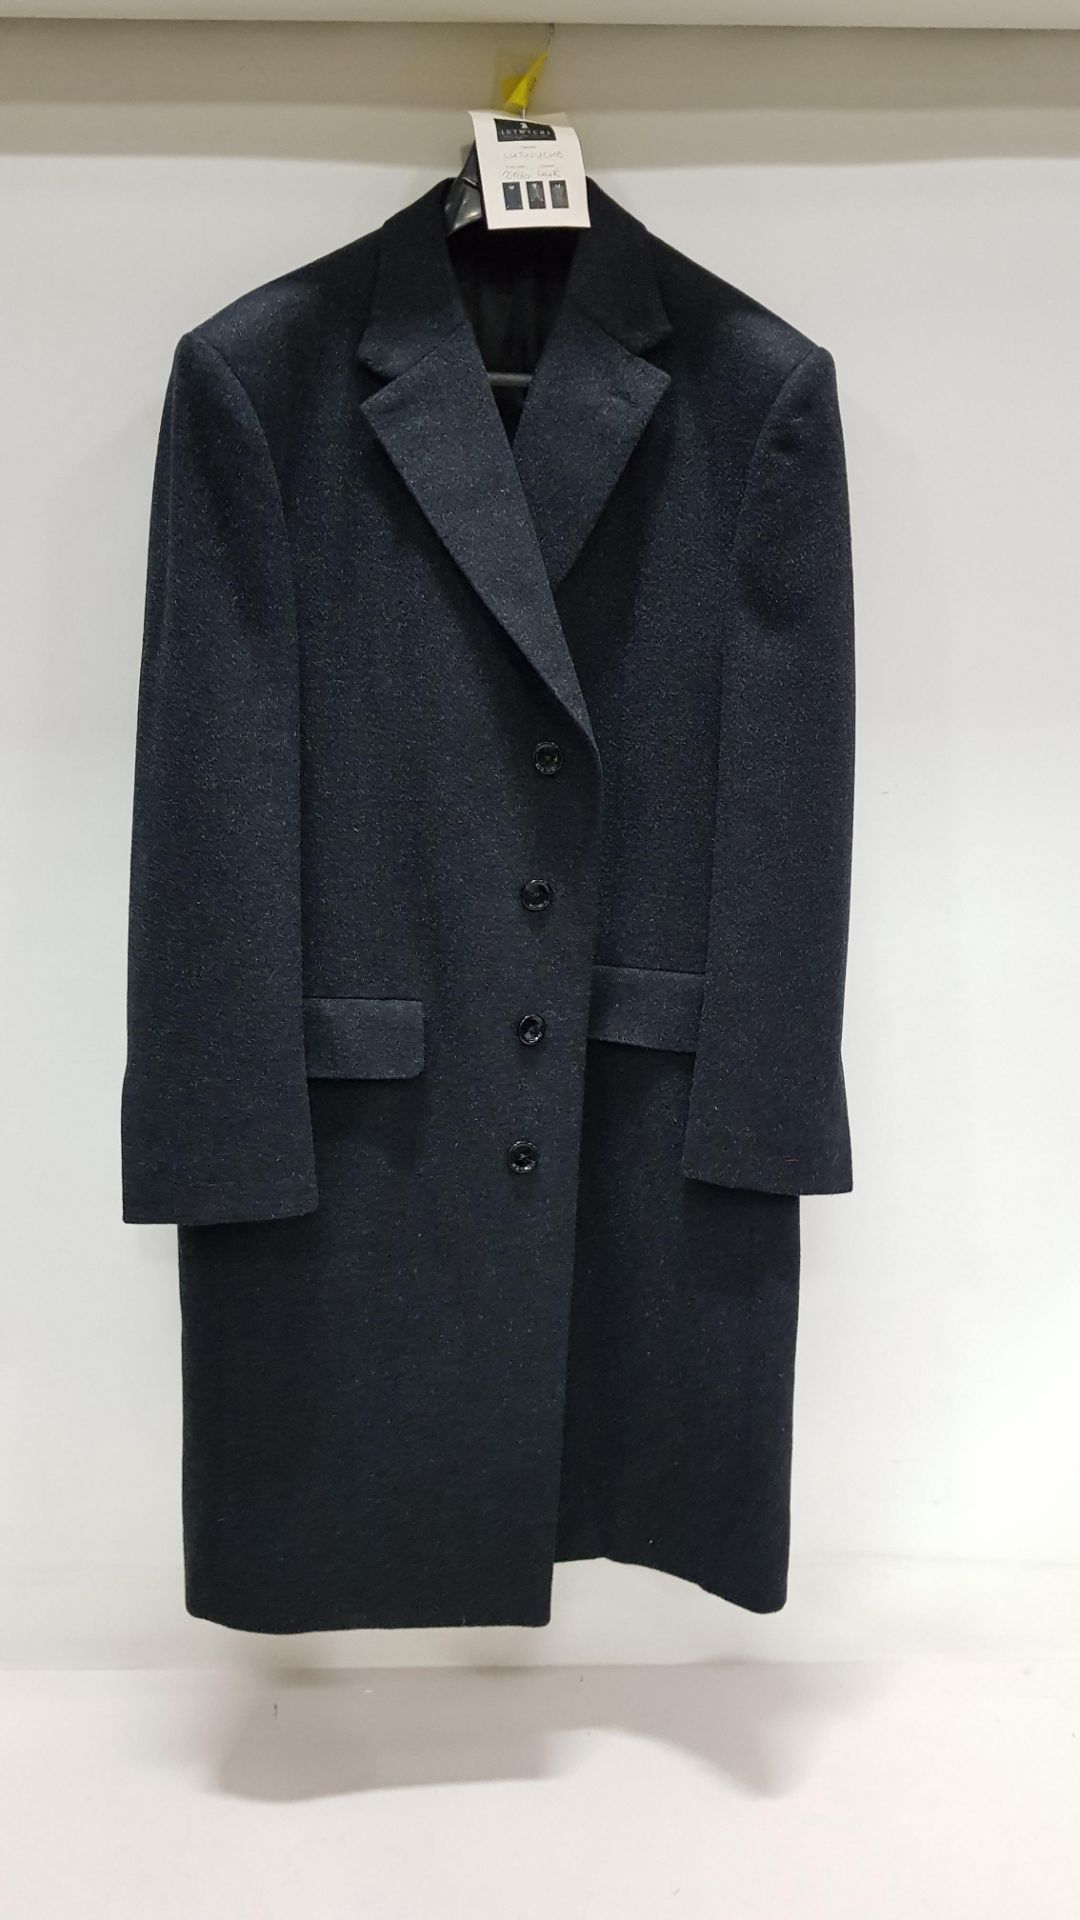 BRAND NEW LUTWYCHE WOOLLEN FULL LENGTH BLACK OVERCOAT SIZE 44R (MINOR TAILOR FINISHING REQUIRED ON